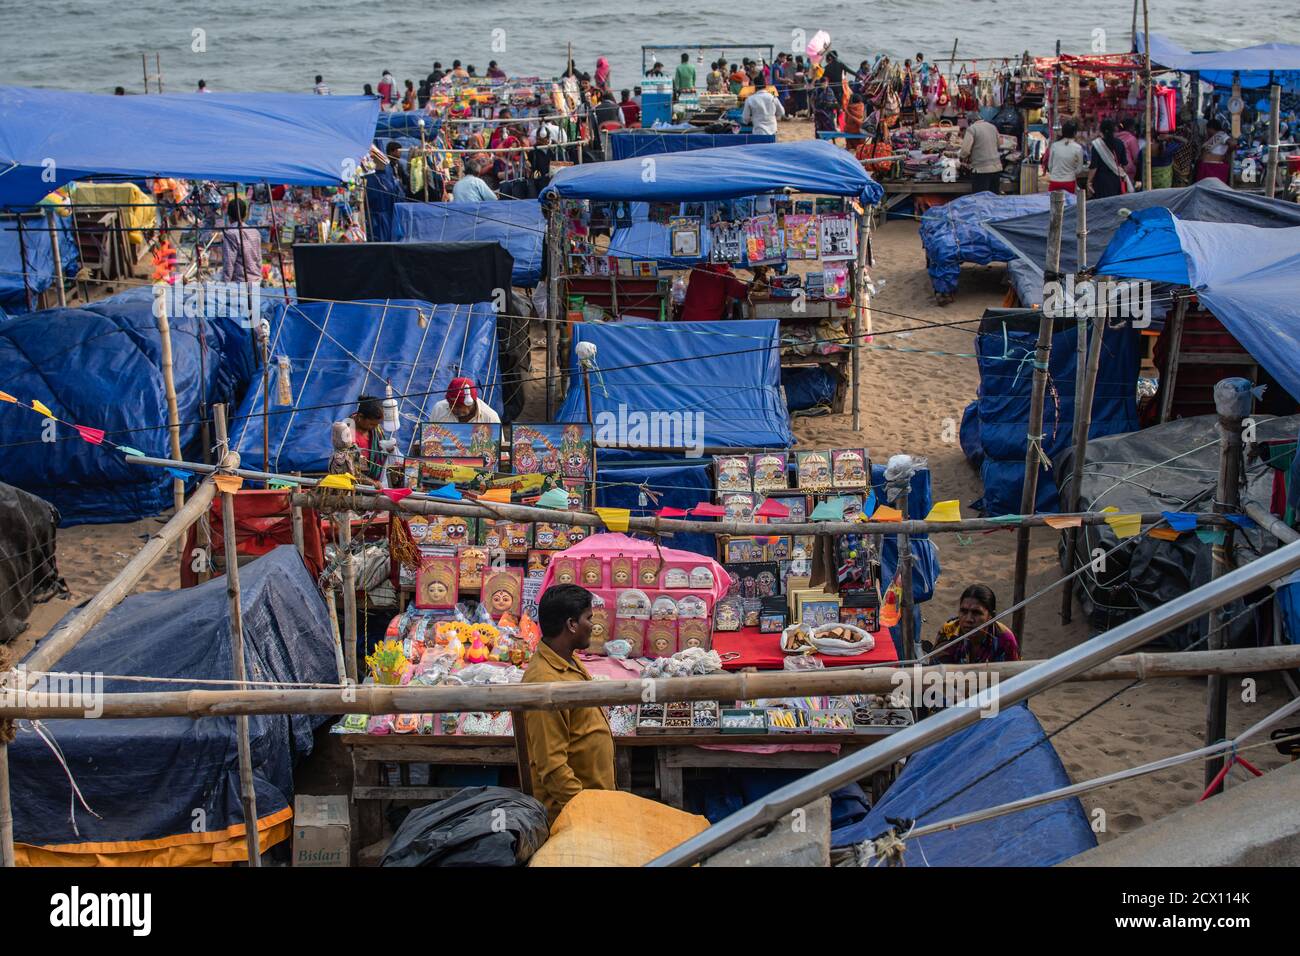 Puri, India - February 3, 2020: Unidentified people attends a market at Puri Beach on February 3, 2020 in Puri, India Stock Photo